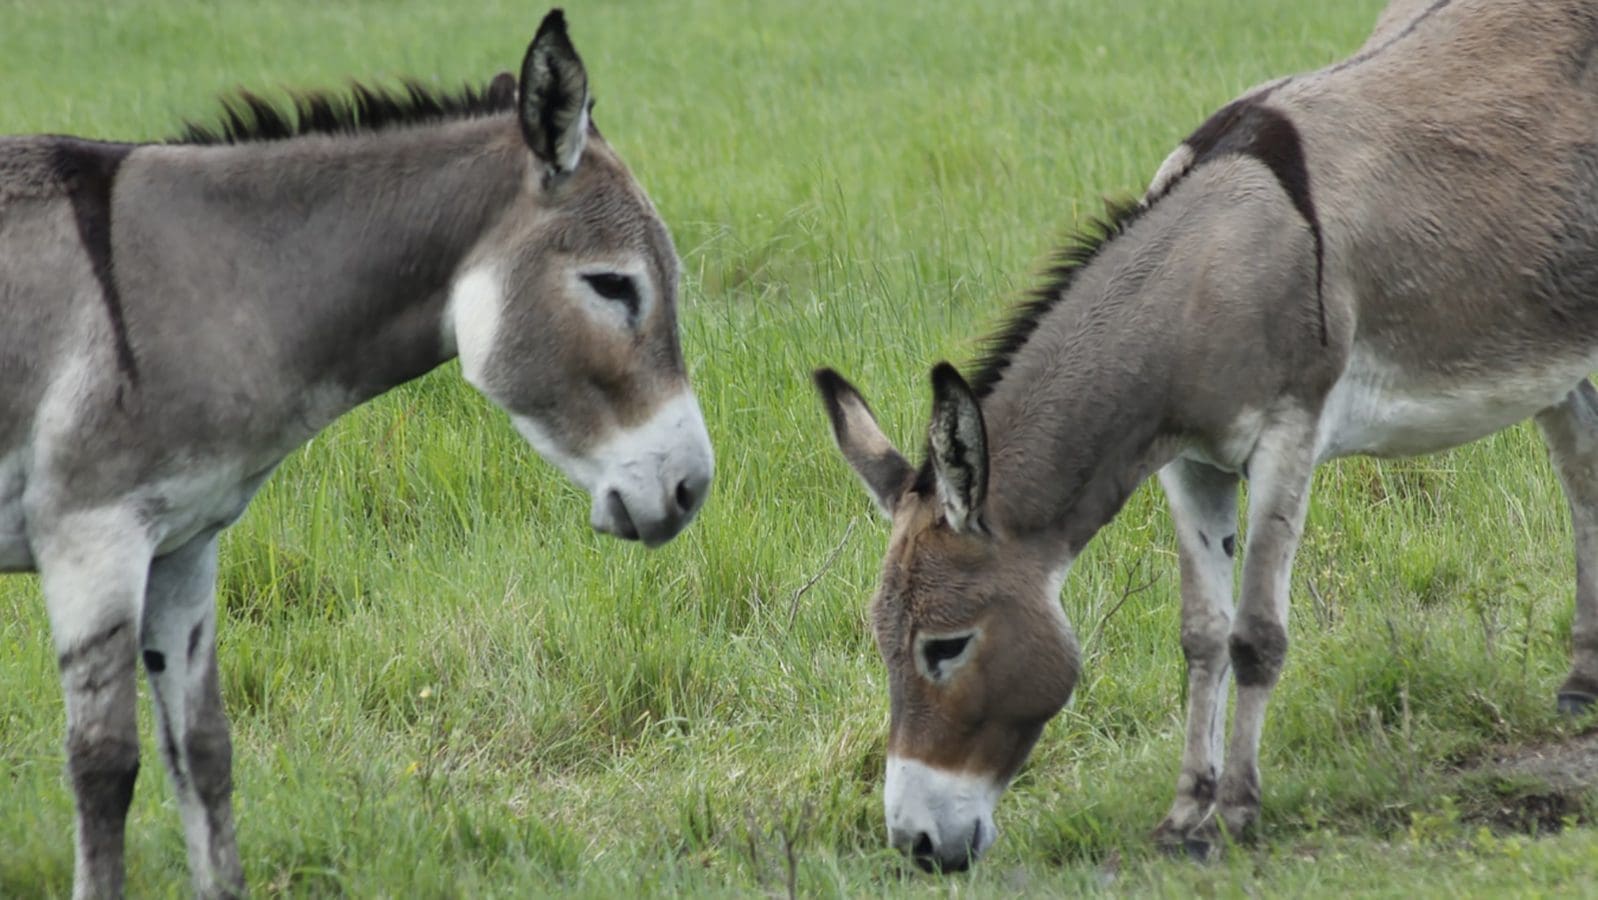 Chinese donkey processing company recommences operations in Ethiopia after 7 years of closure